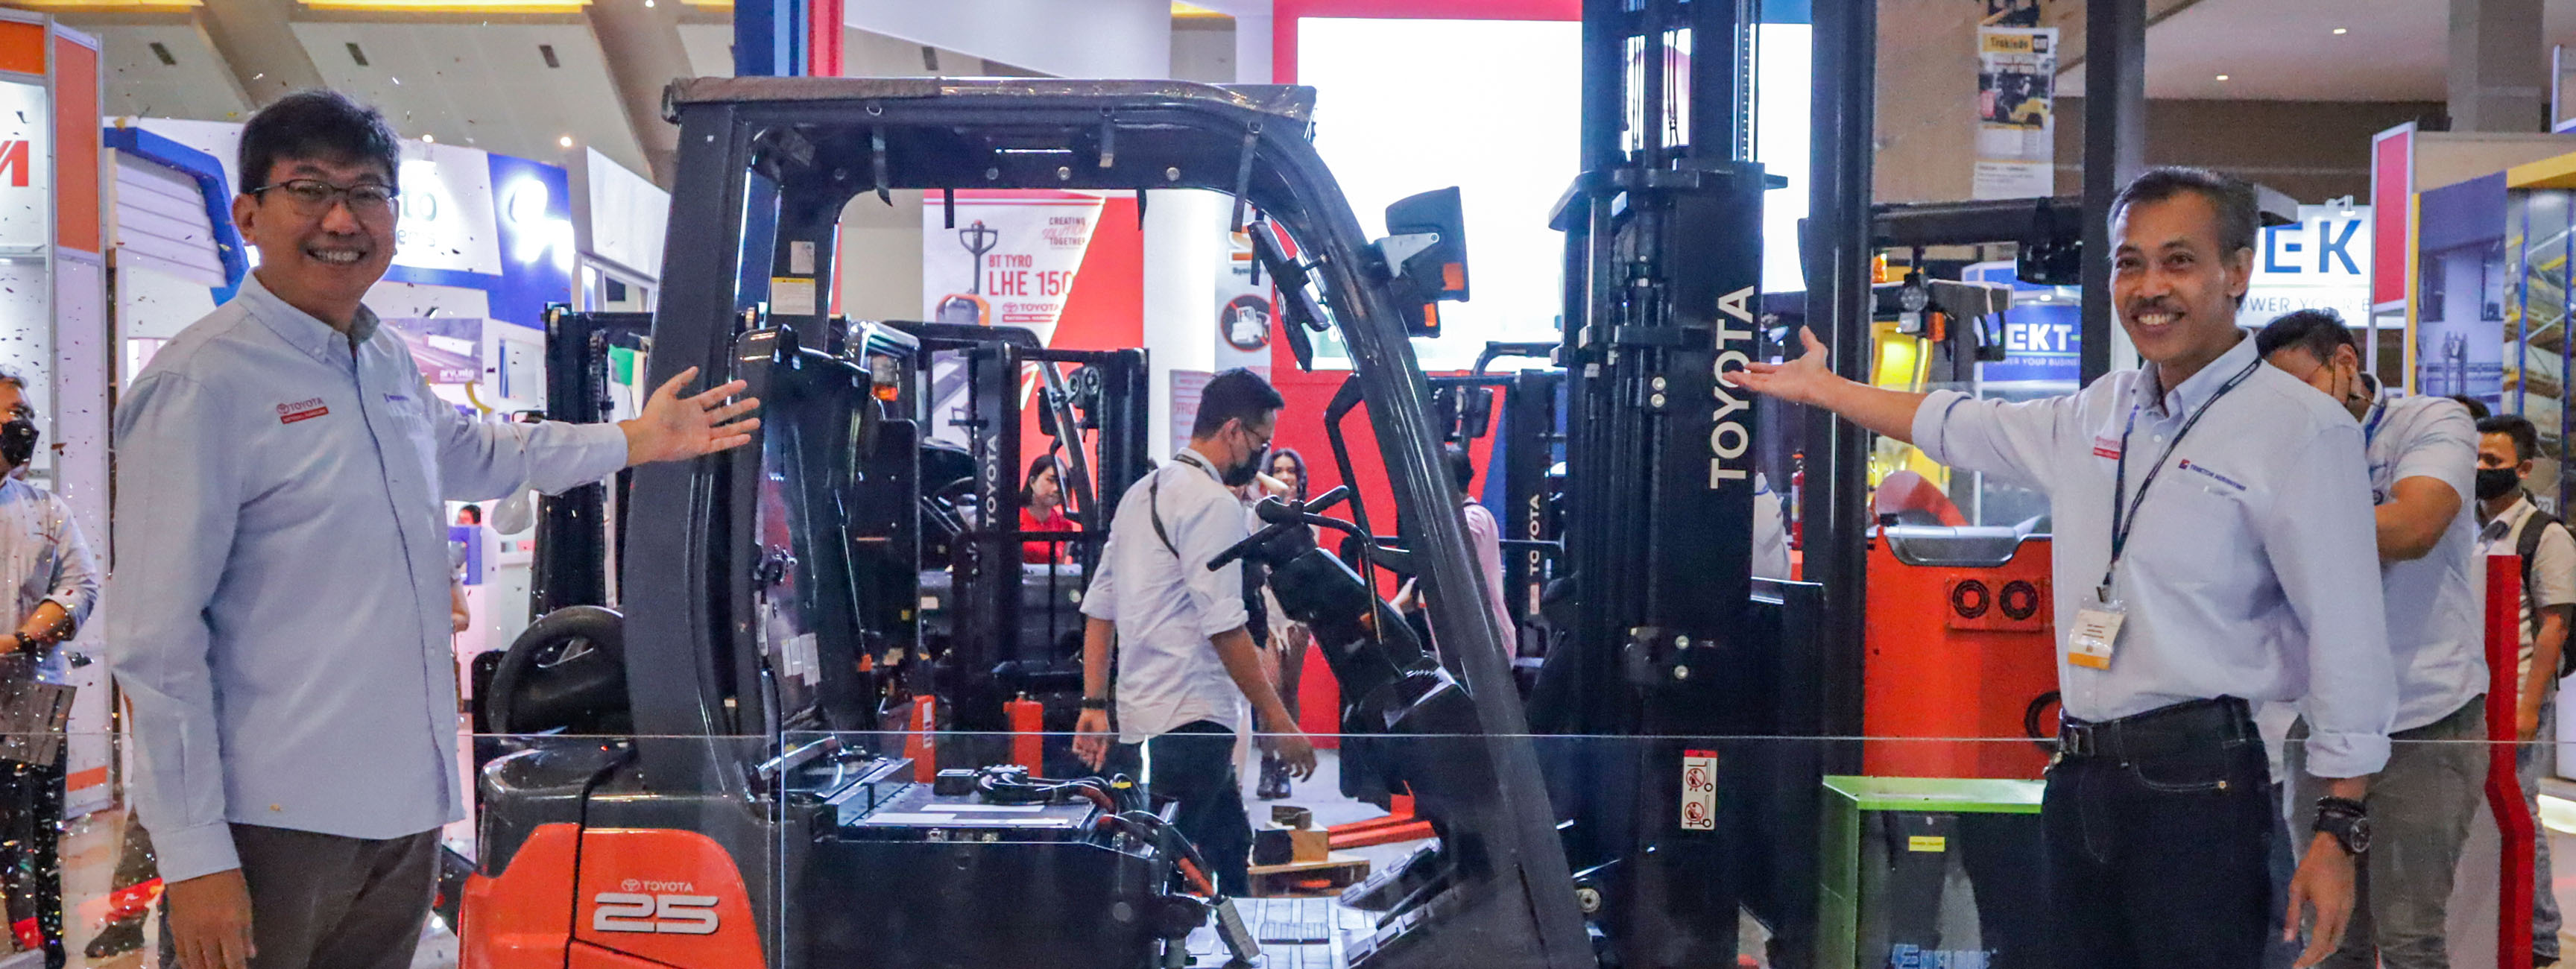 Forklift expo 03